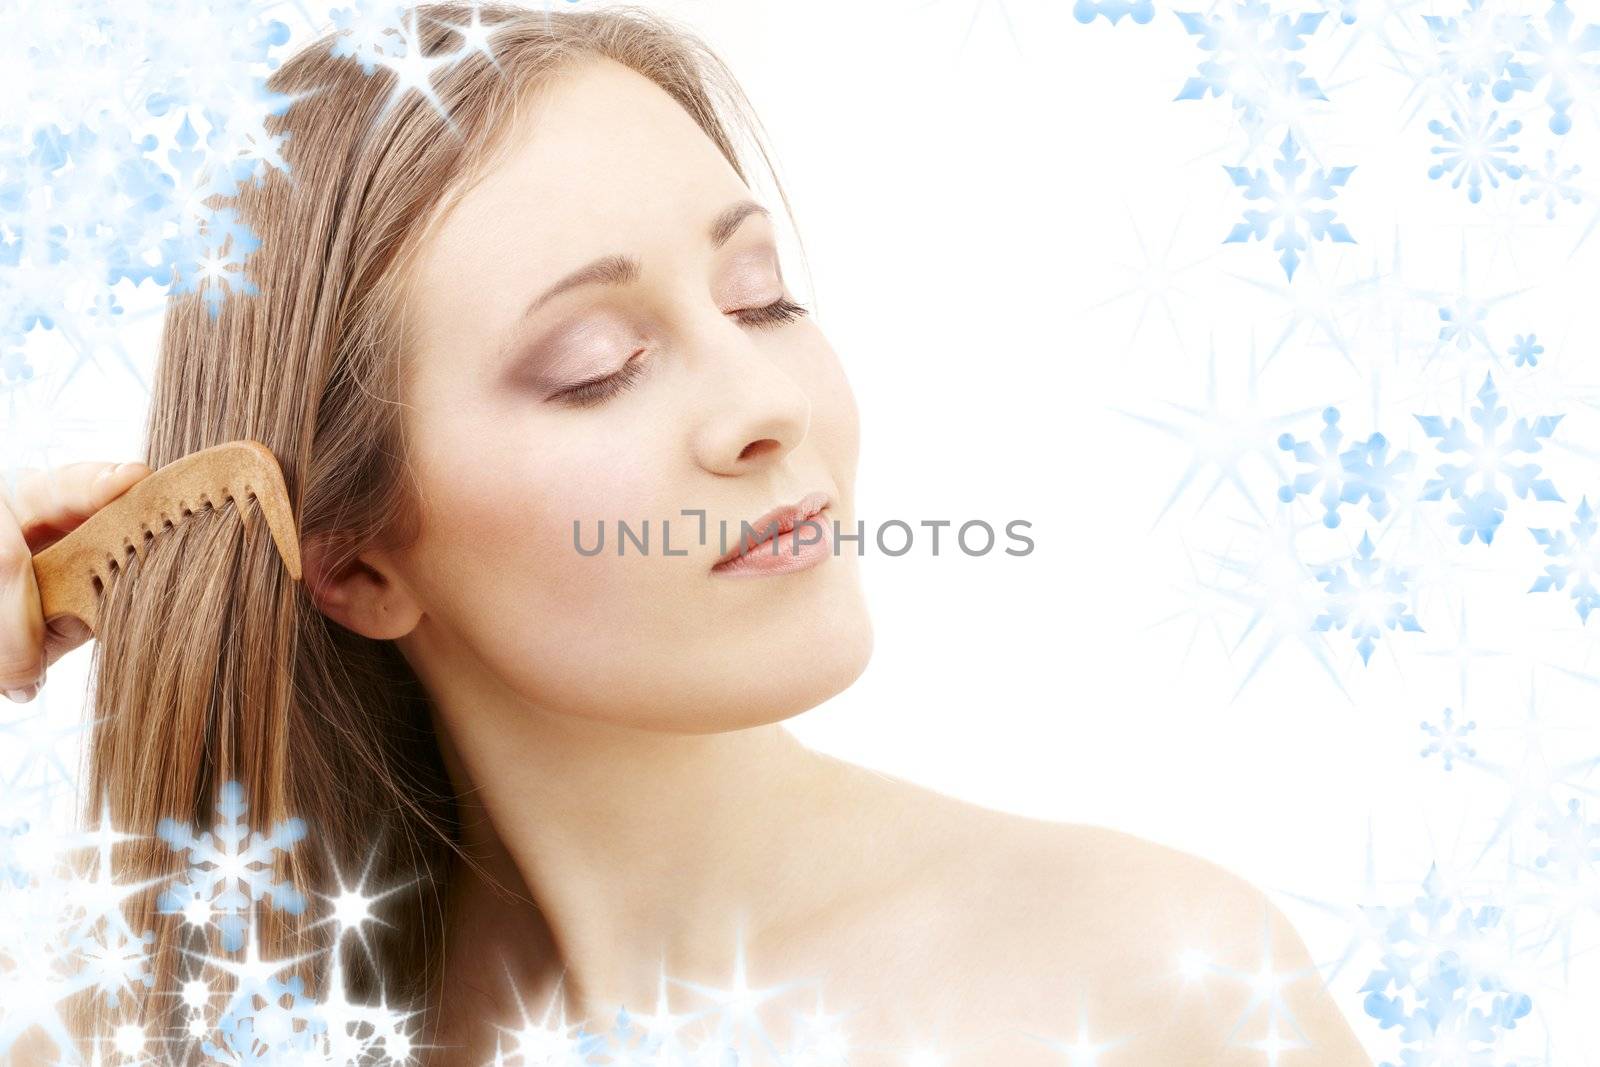 bright picture of combing woman with snowflakes